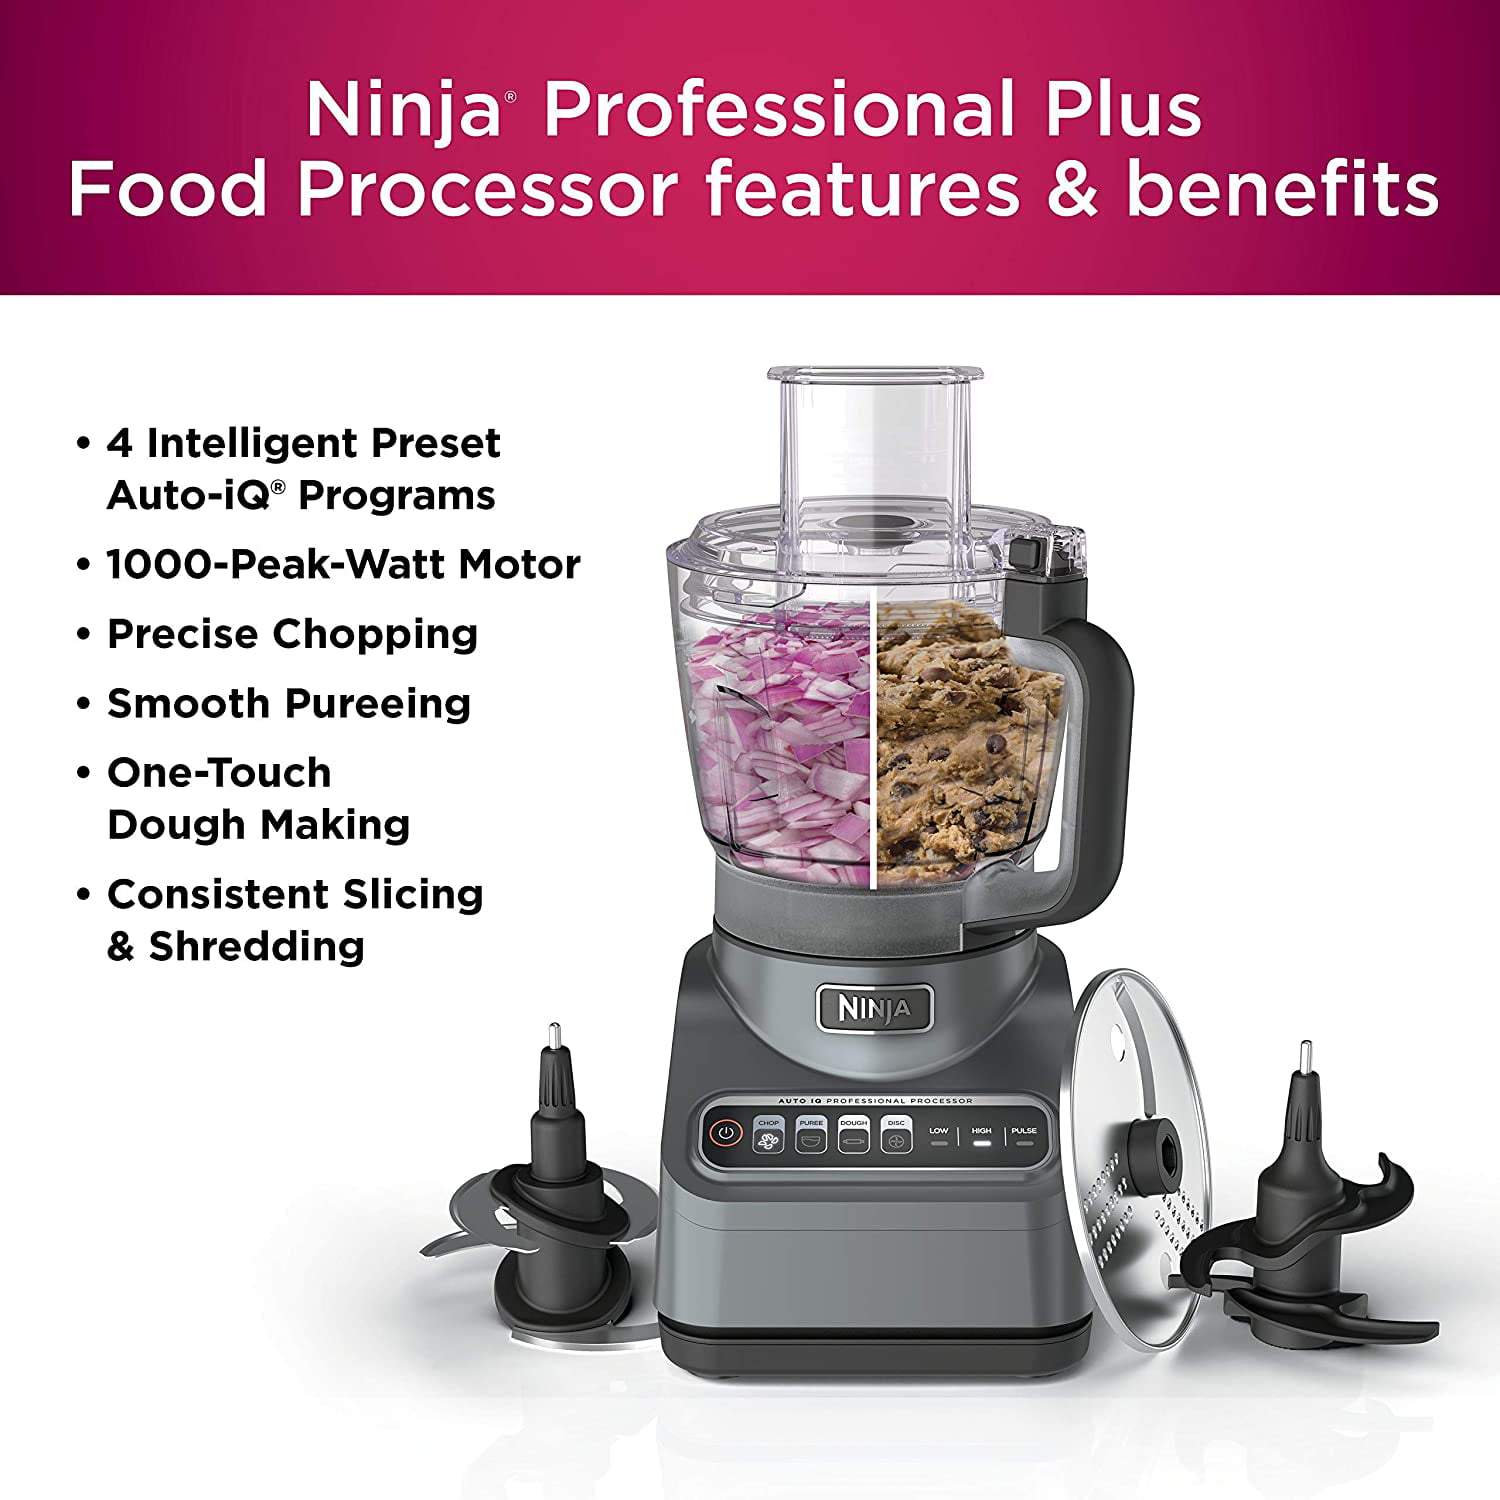 Ninja BN601 Professional Plus Food Processor 1000-Peak-Watts with Auto-iQ  Preset Programs Chop Puree Dough Slice Shred with a 9-Cup Capacity and a